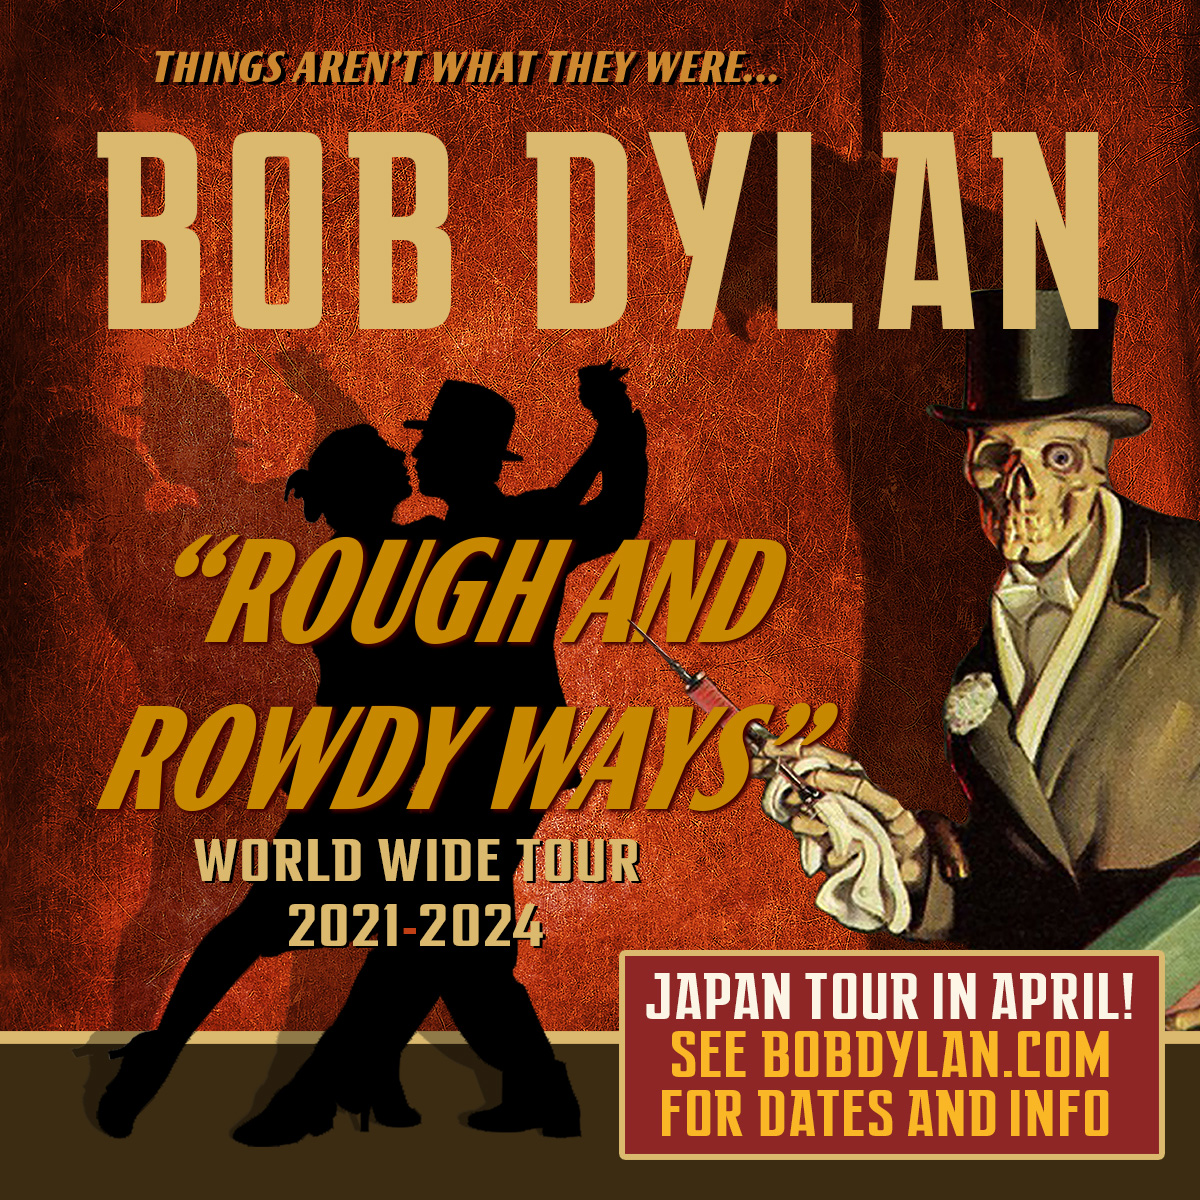 The Rough and Rowdy Ways tour arrives in Japan in April! Dates and on-sale information can be found at bobdylan.com/on-tour/